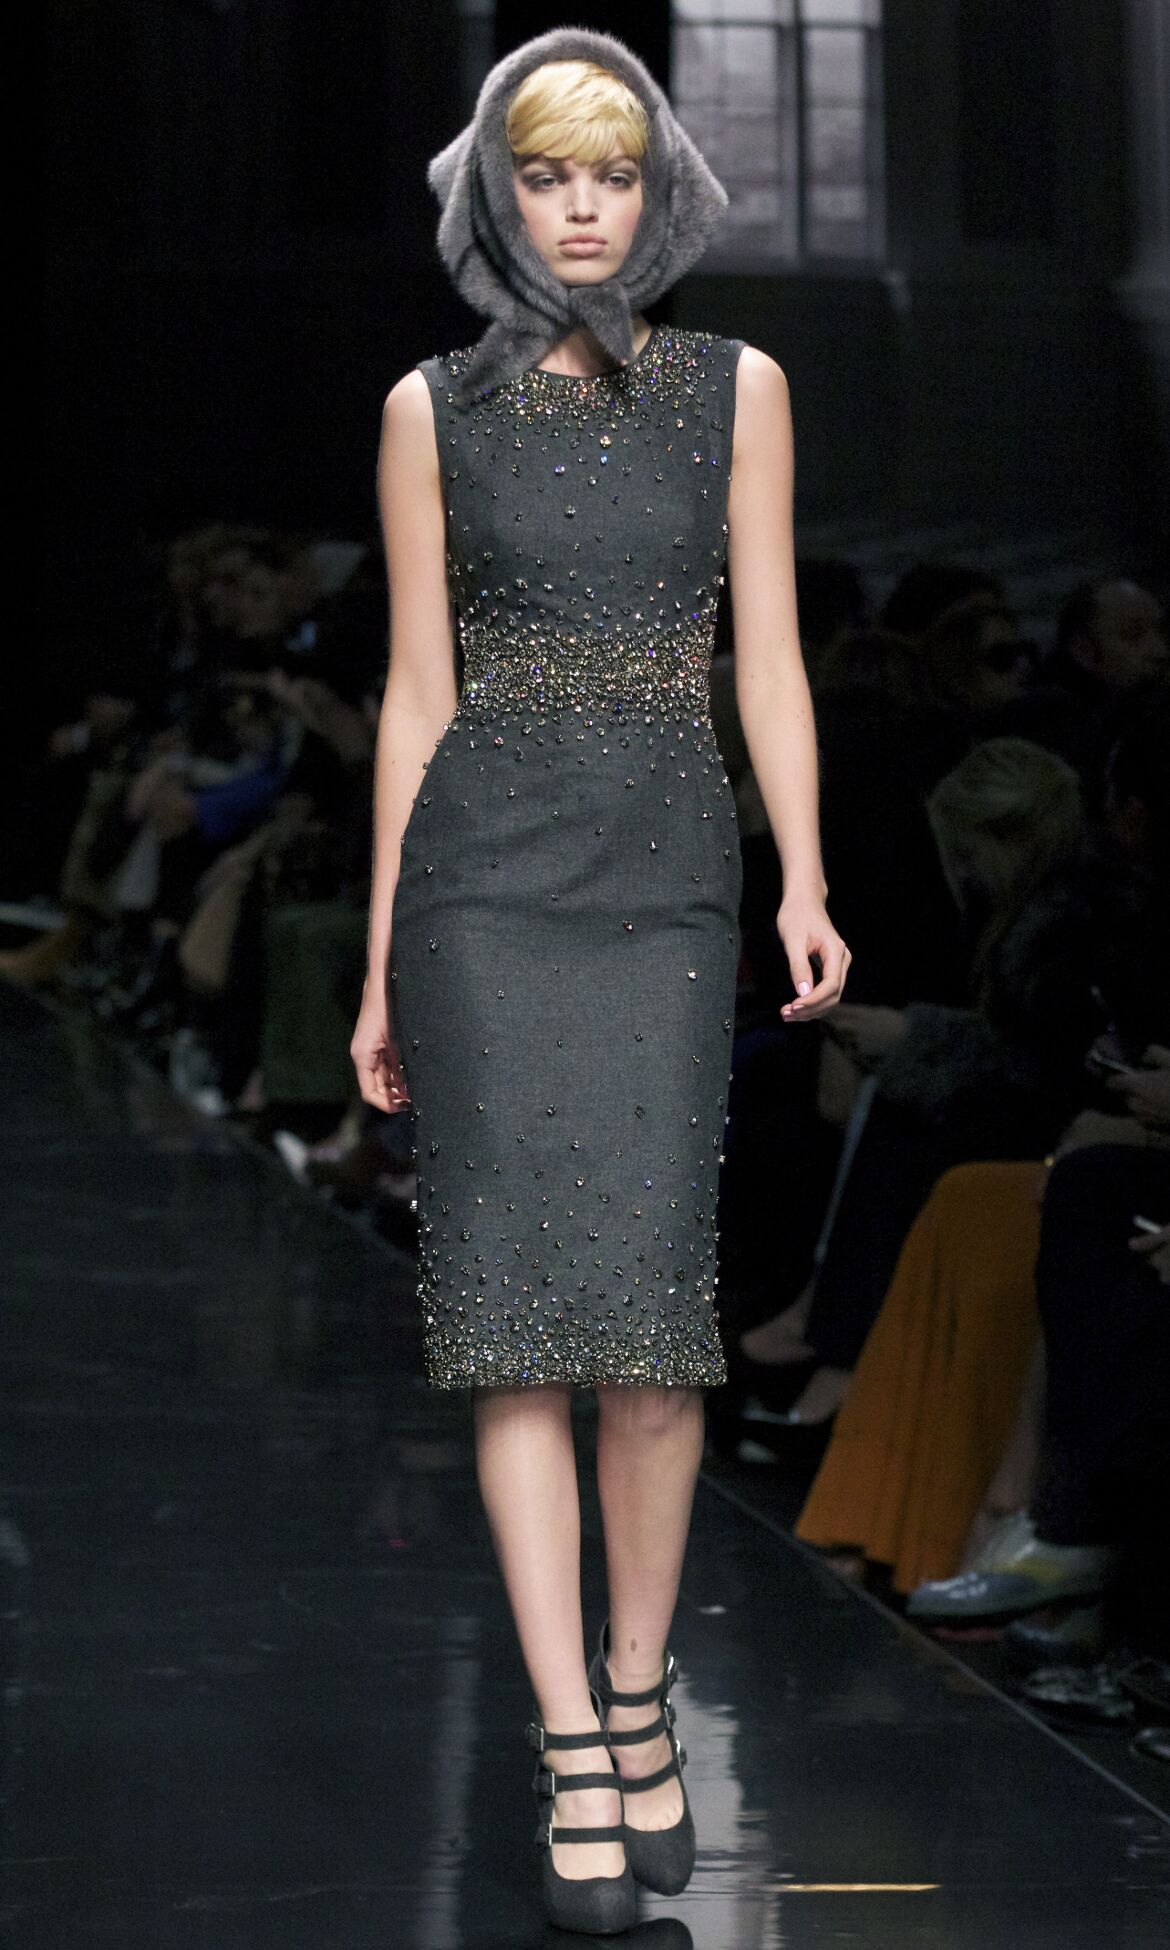 ERMANNO SCERVINO FALL WINTER 2013-14 WOMEN'S COLLECTION | The Skinny Beep